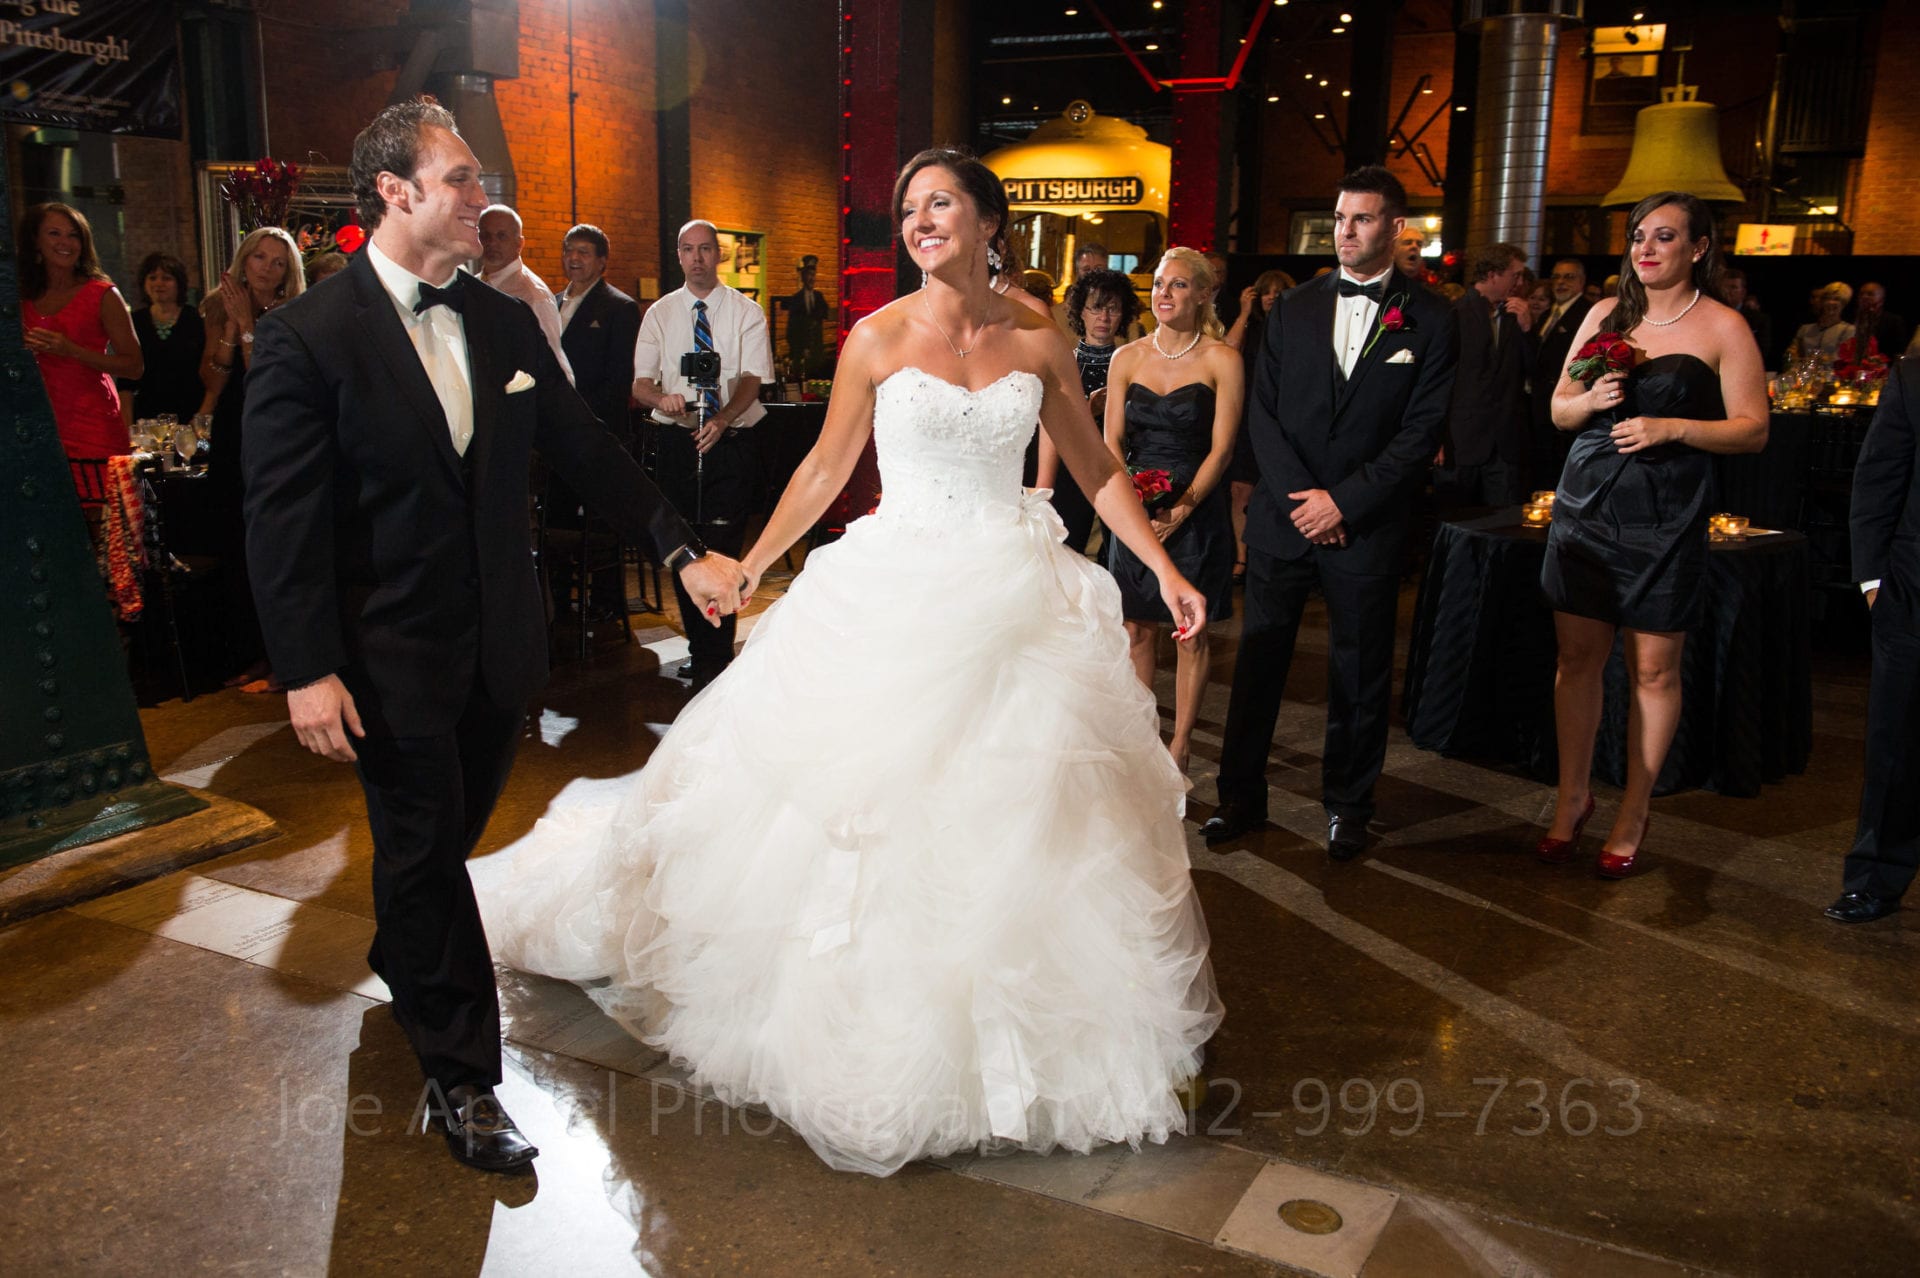 A bride and groom hold hands and walk on to the dance floor at the Heinz History Center.